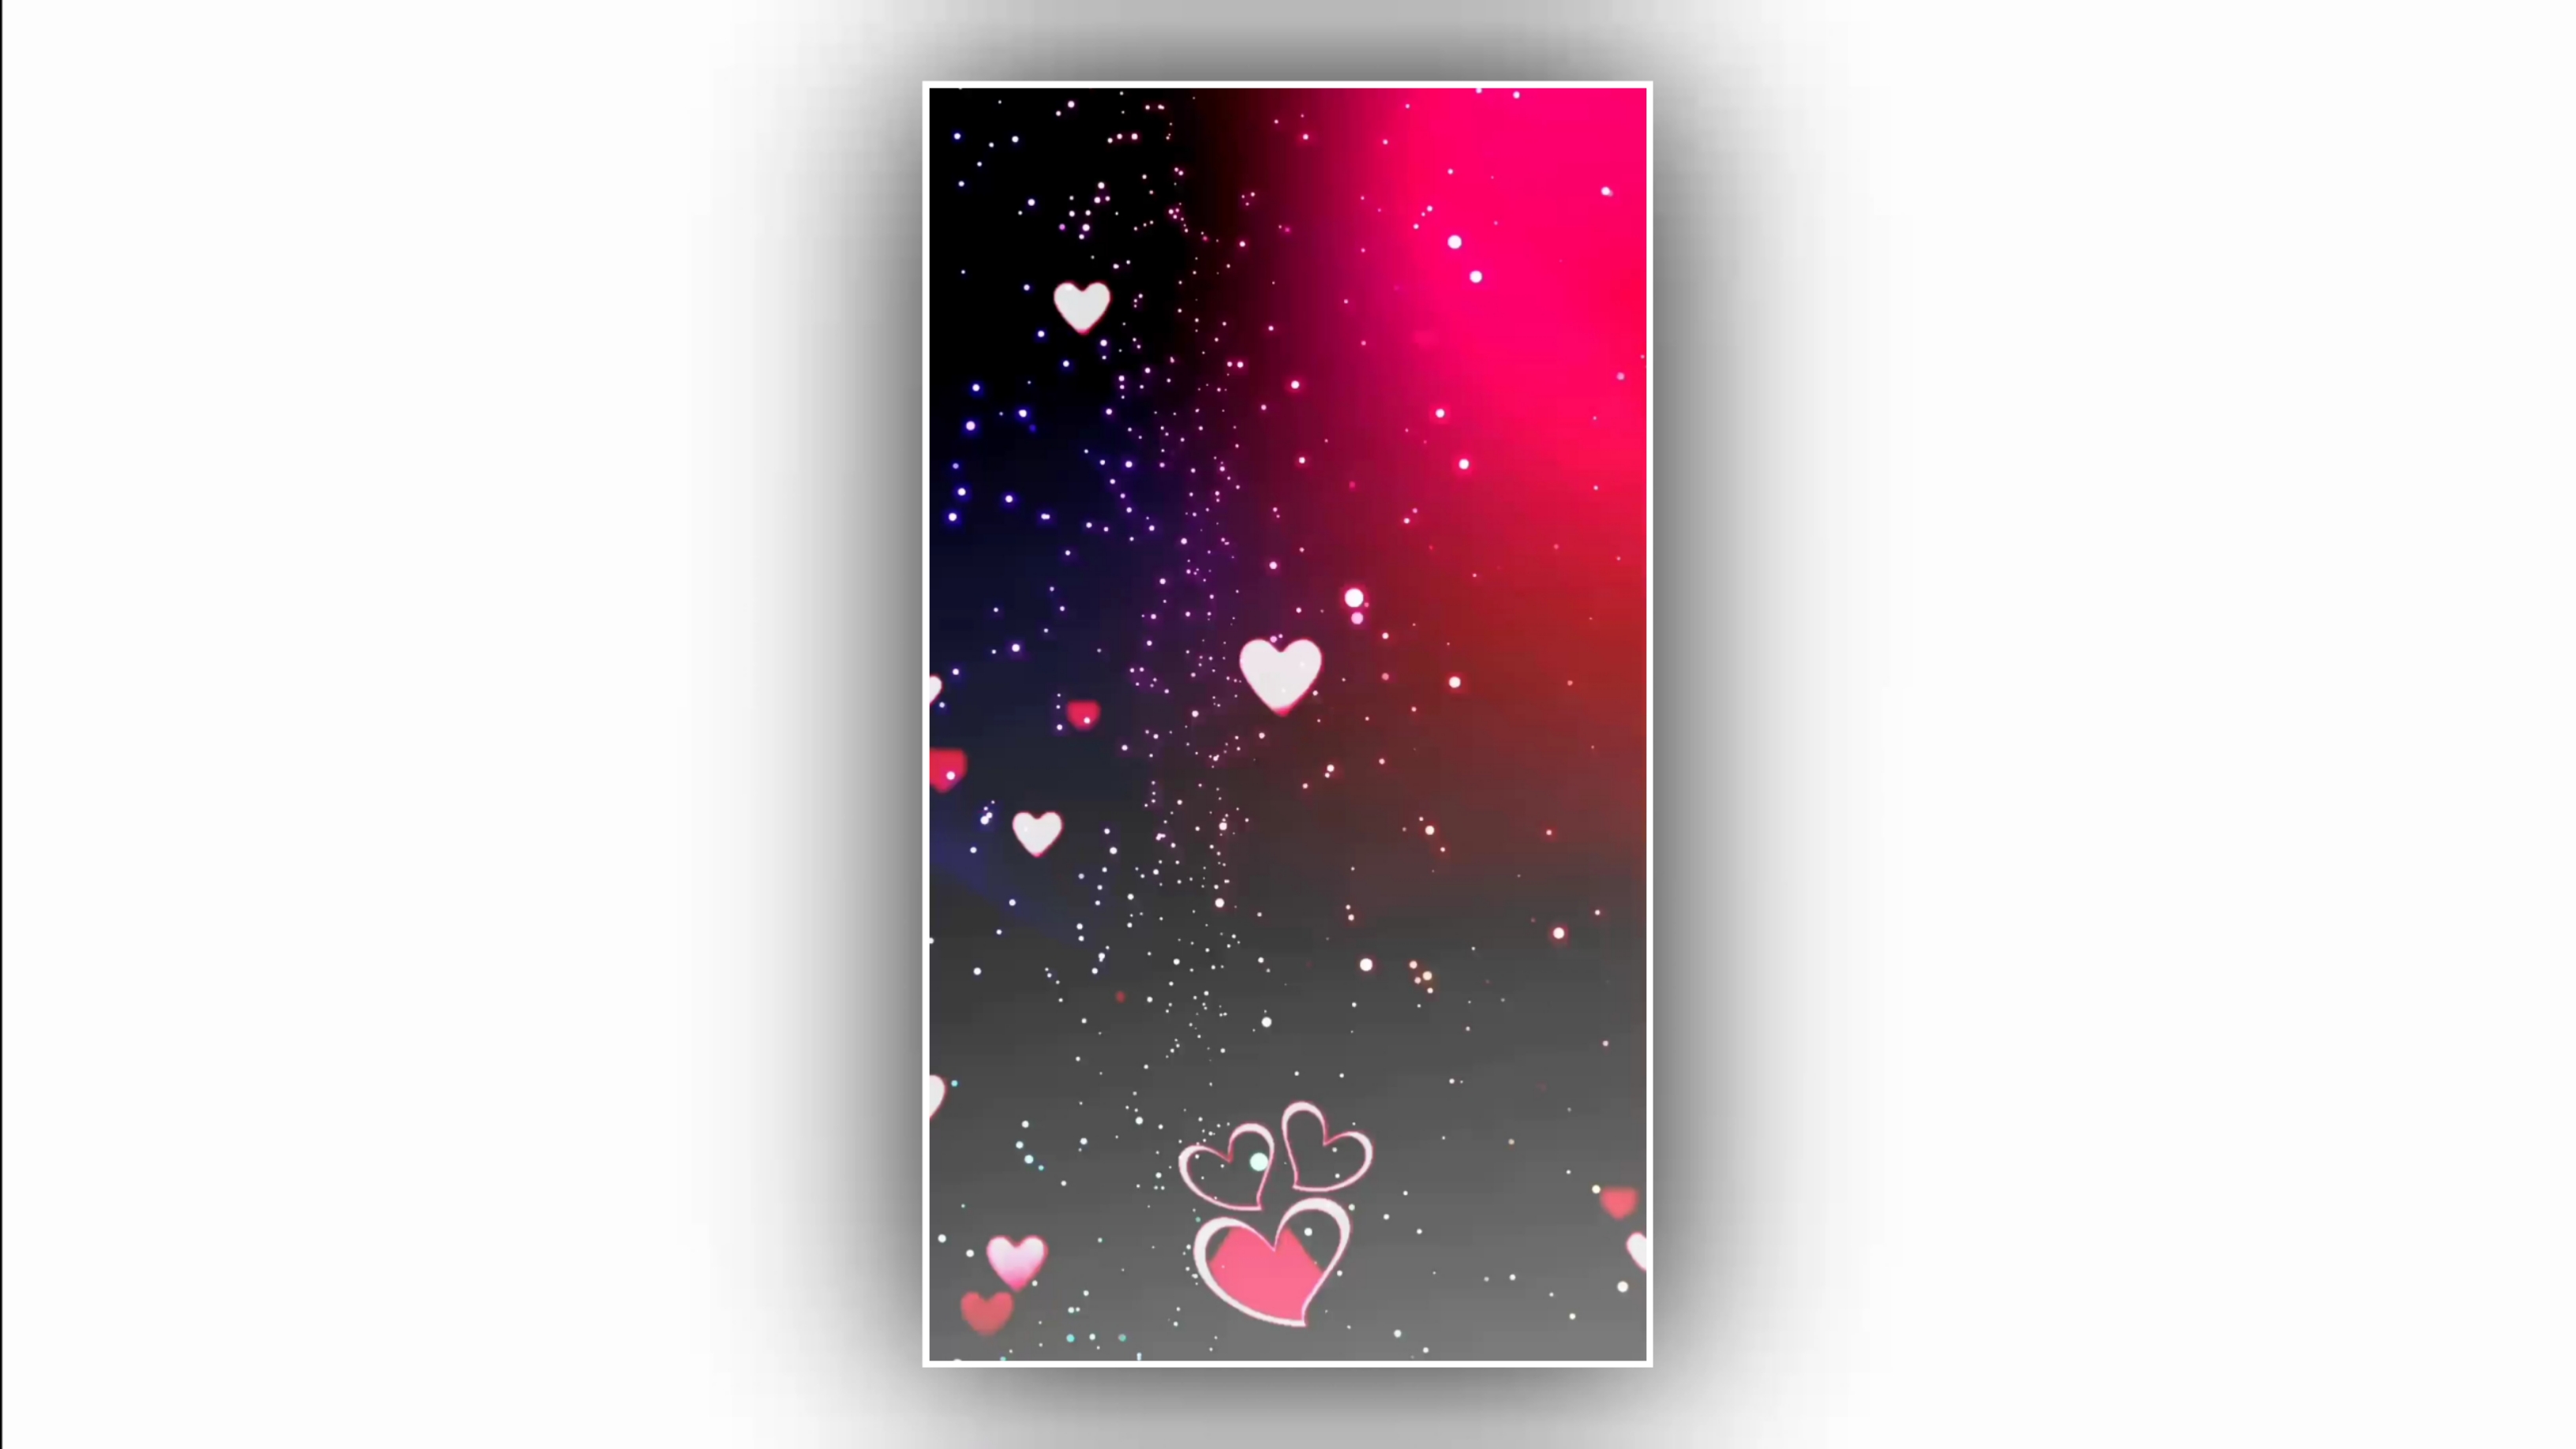 New heart animation video effect free black screen template